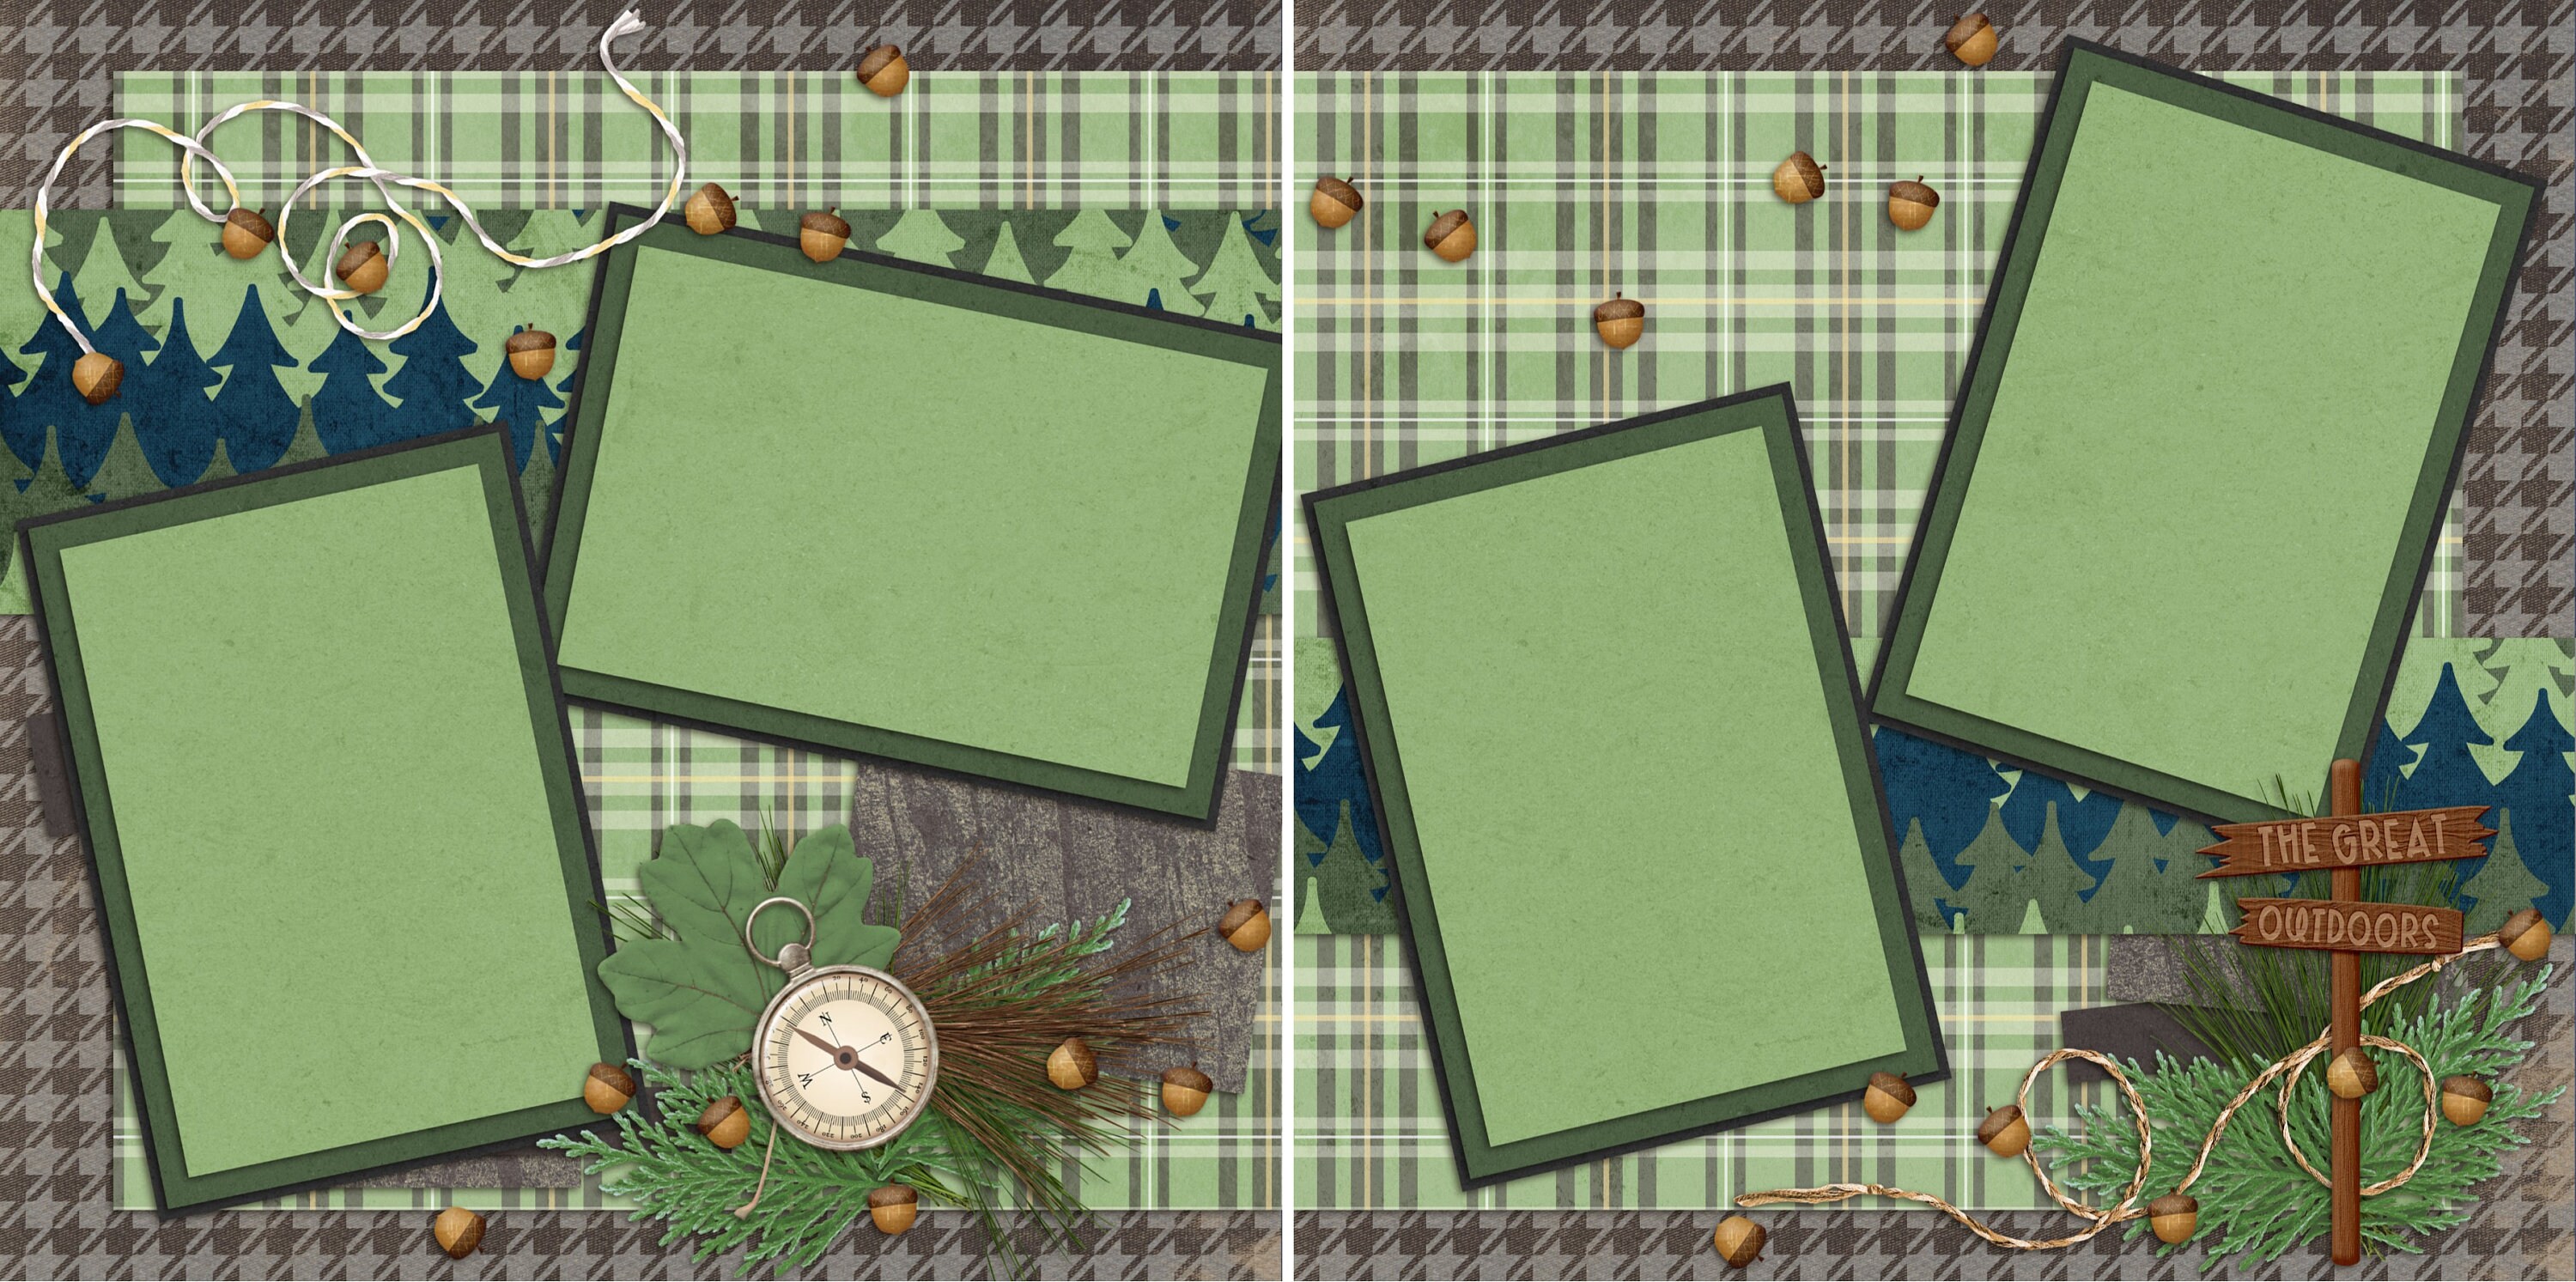 Scouting - Premade Scrapbook Pages - EZ Layout 2134